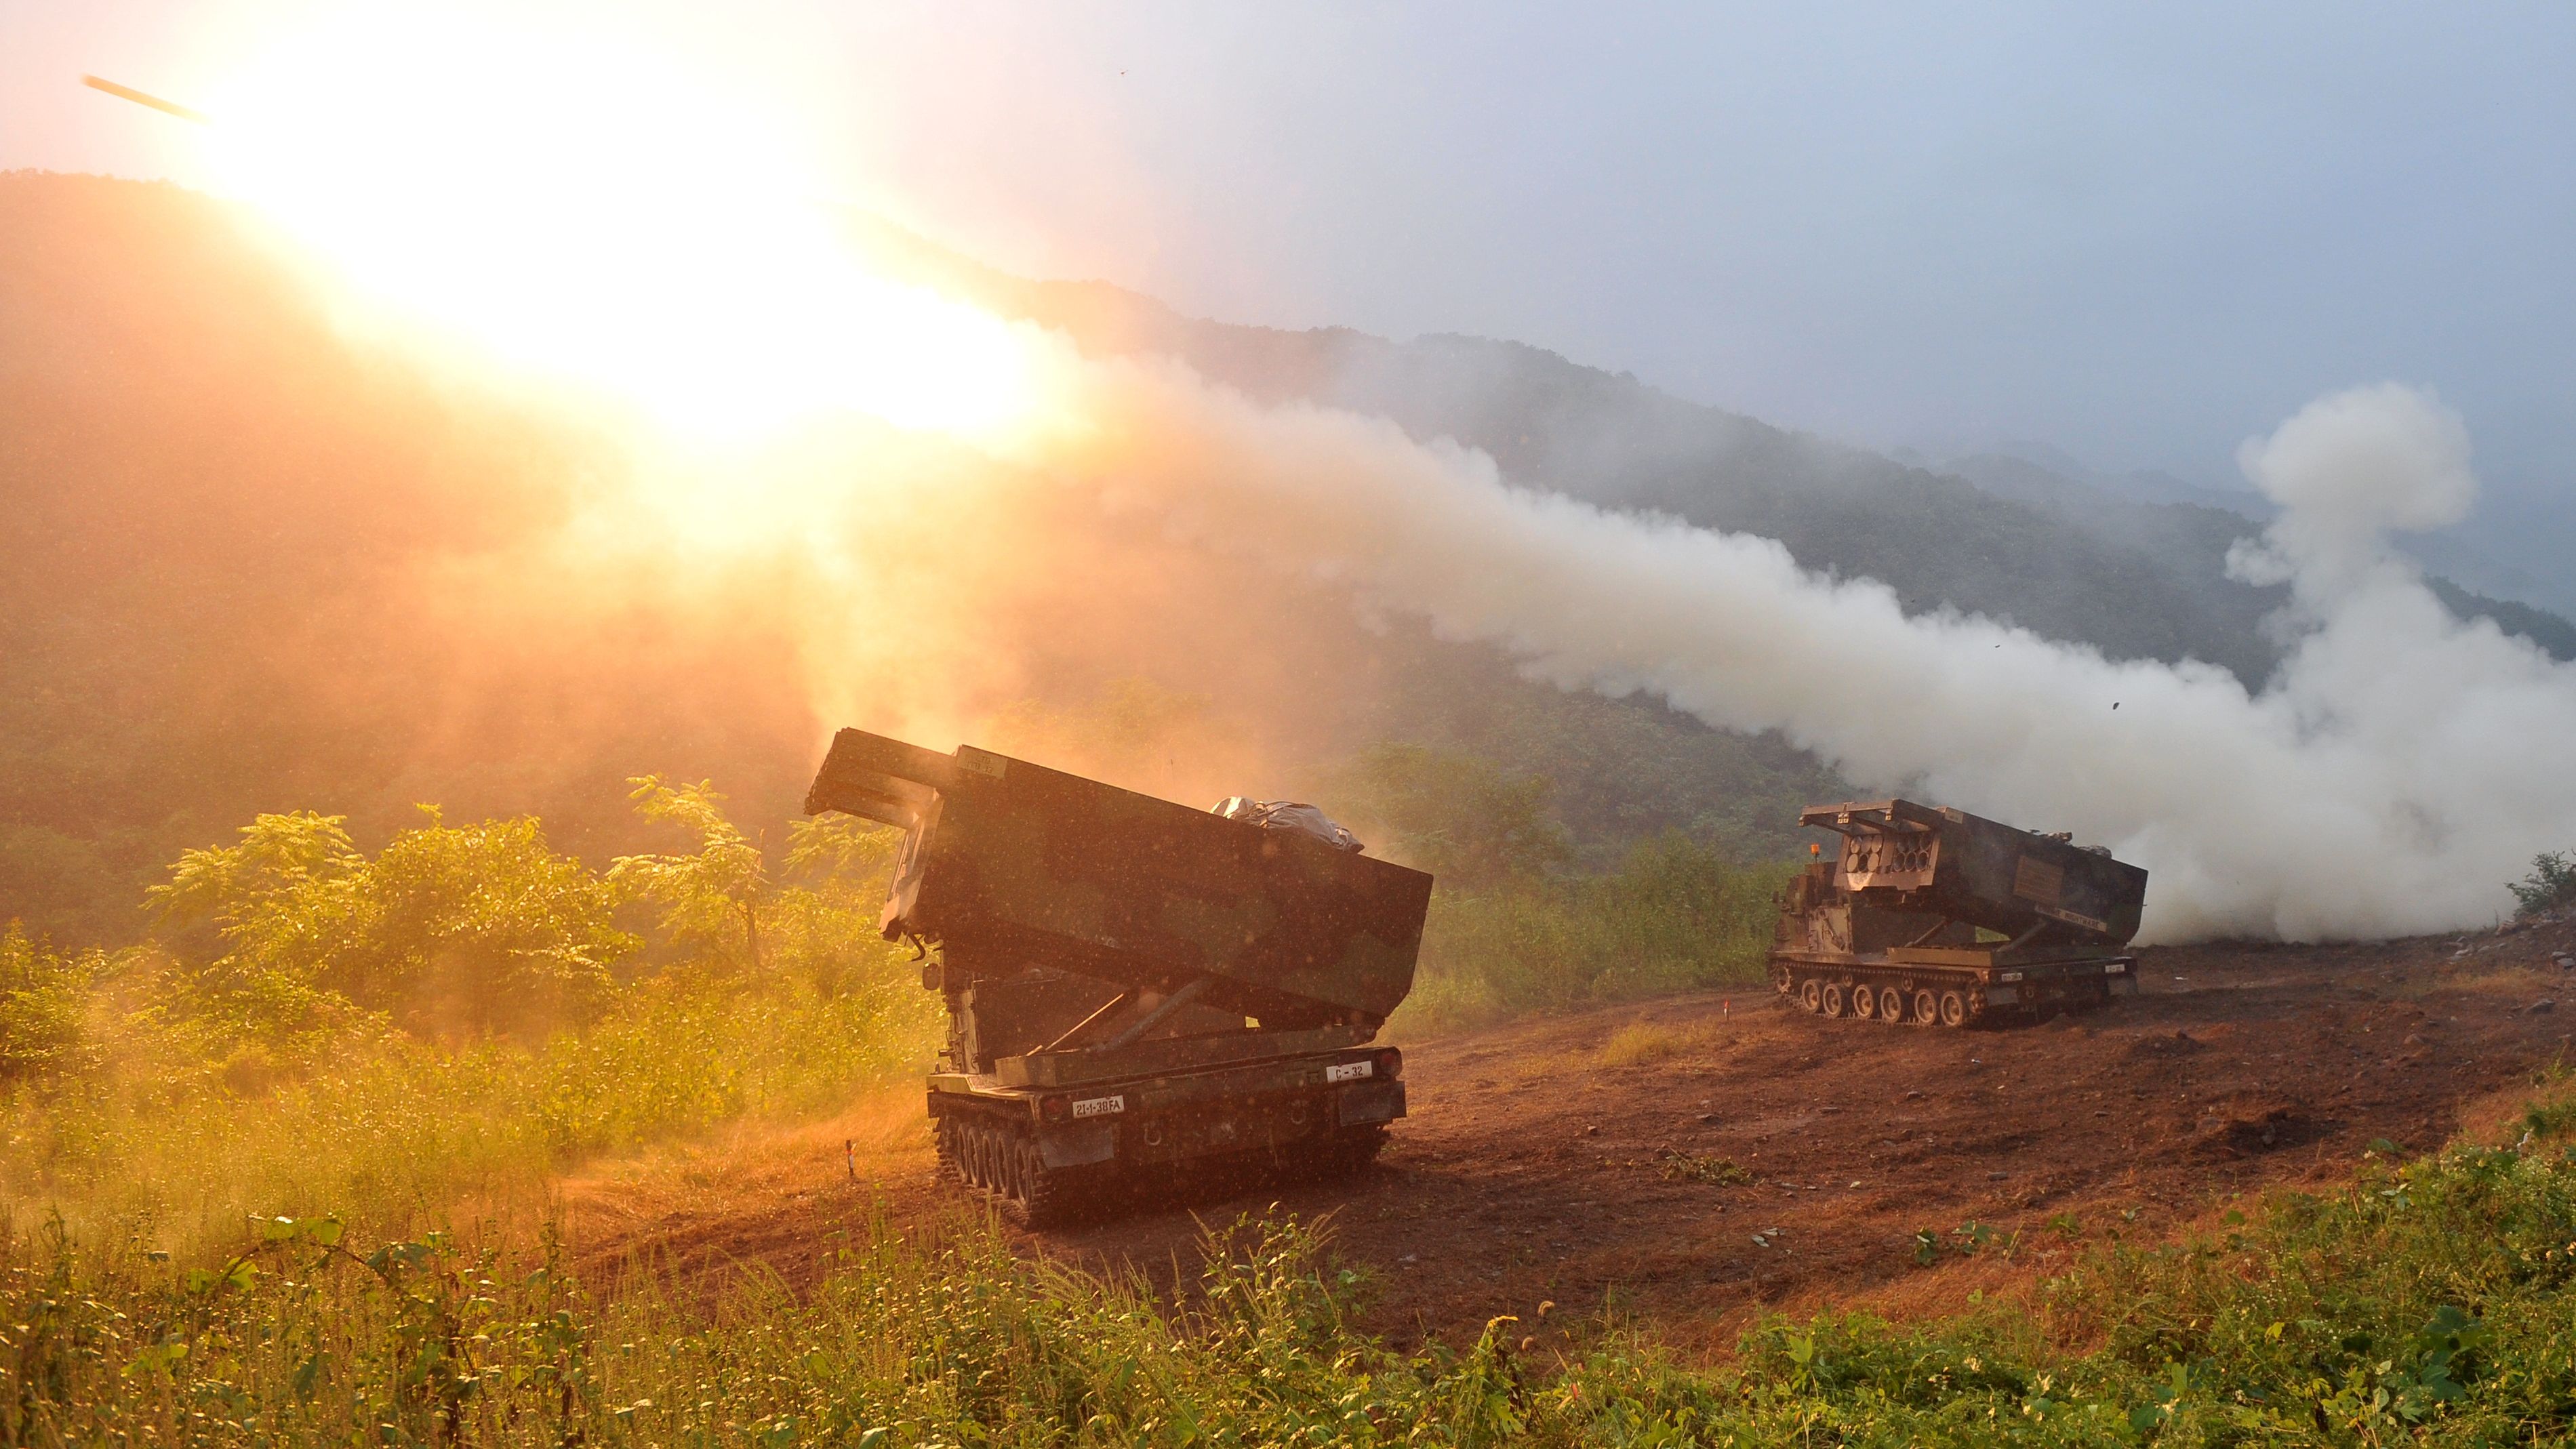 The U.S. Multiple Launch Rocket System launches rockets during a live training exercise in South Korea on September 13.